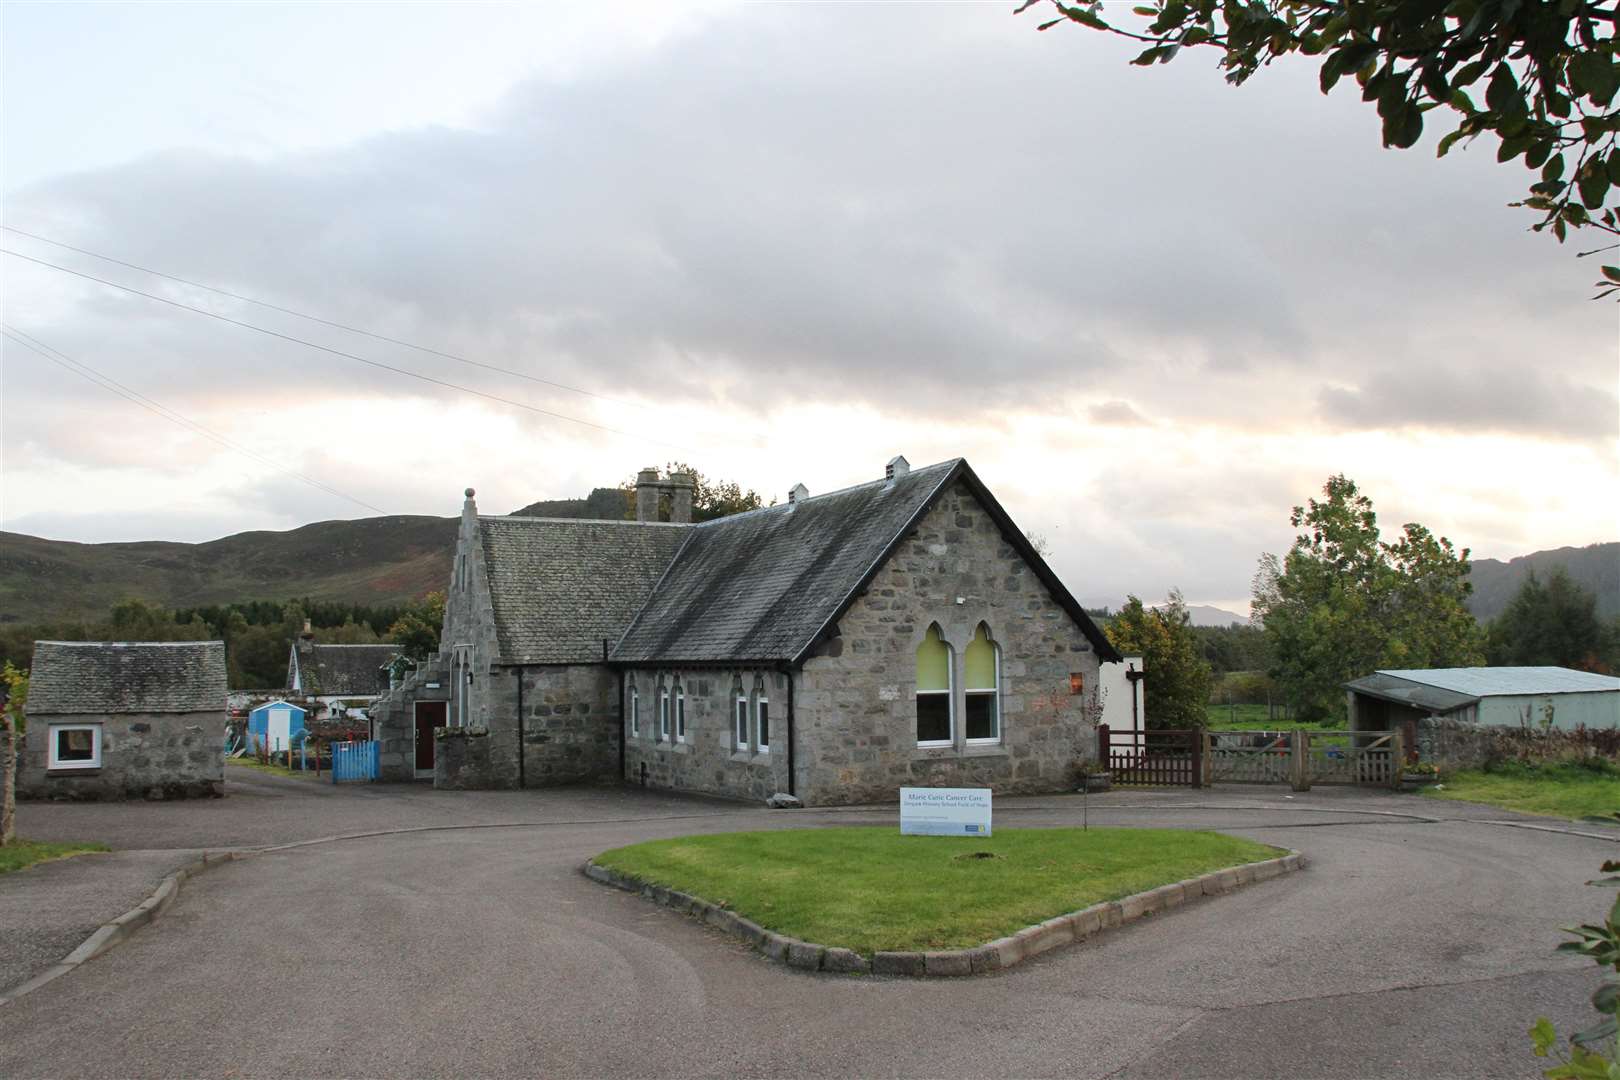 Gergask Primary School in Laggan is to close unless there is an unexpected U-turn.